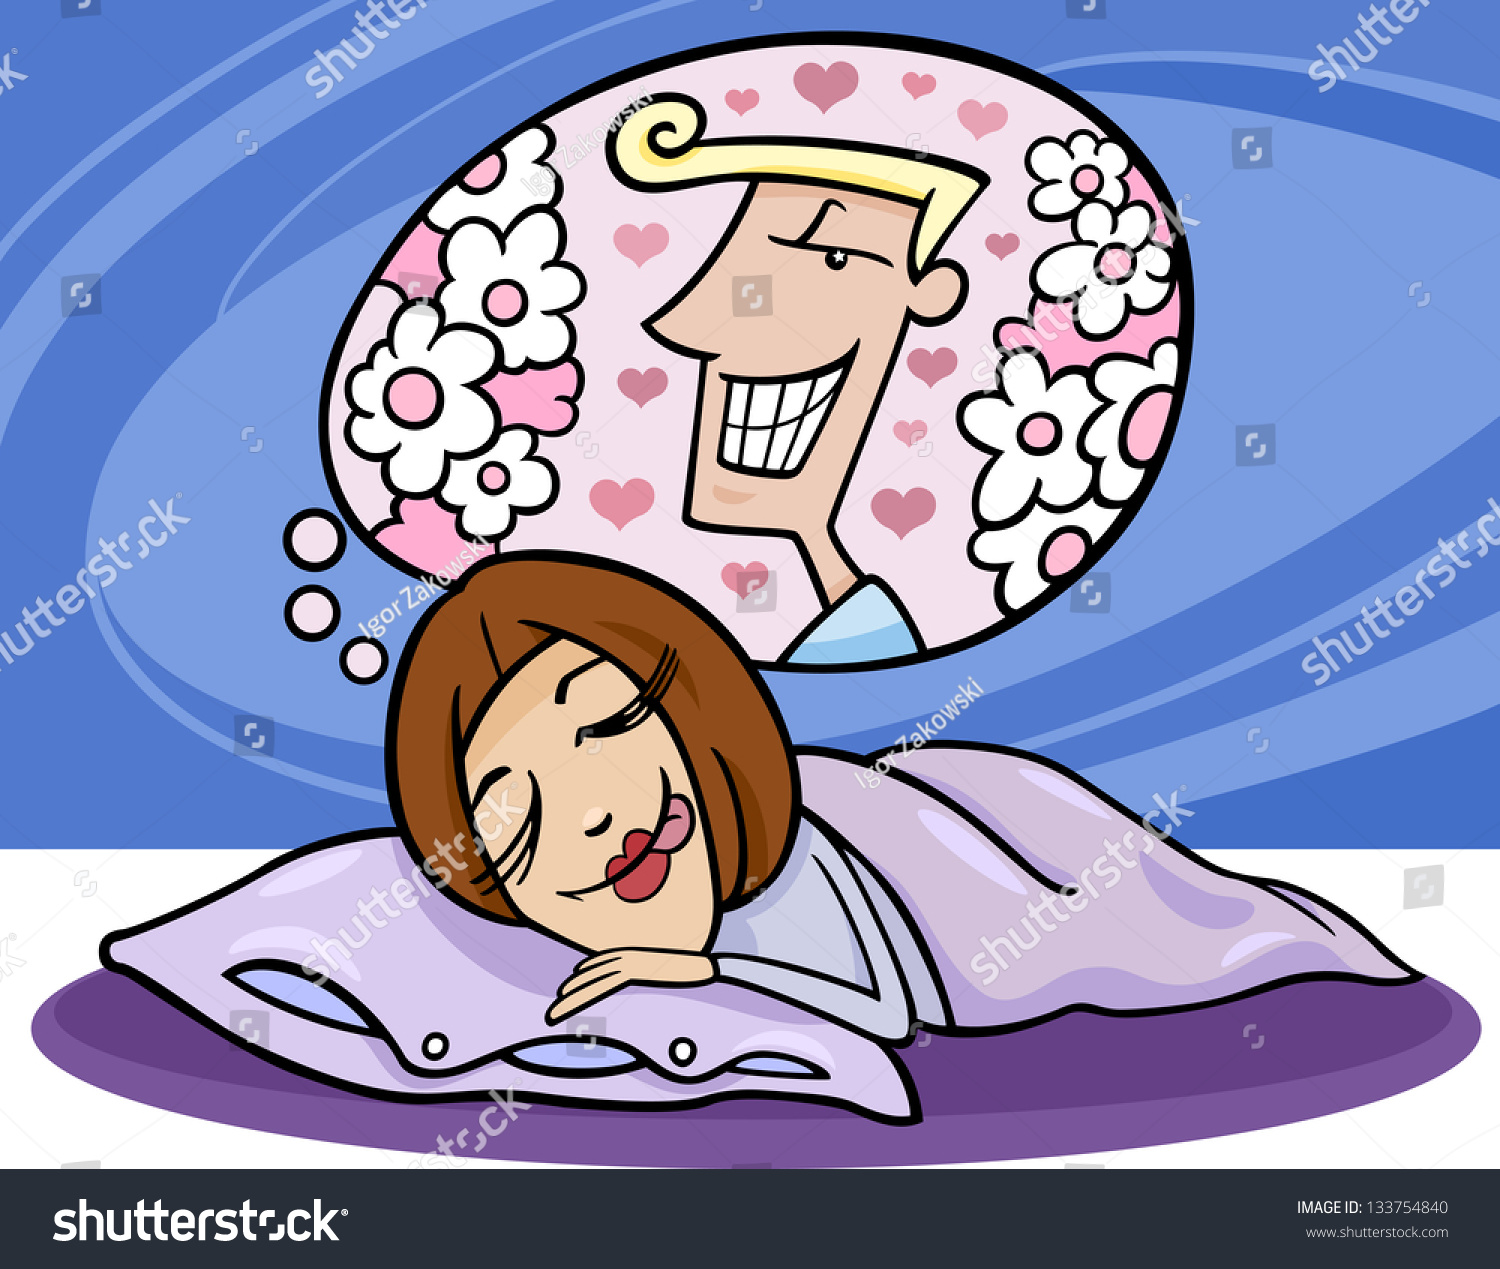 Cartoon Illustration Of Cute Funny Woman In Love Dreaming About A Man ...